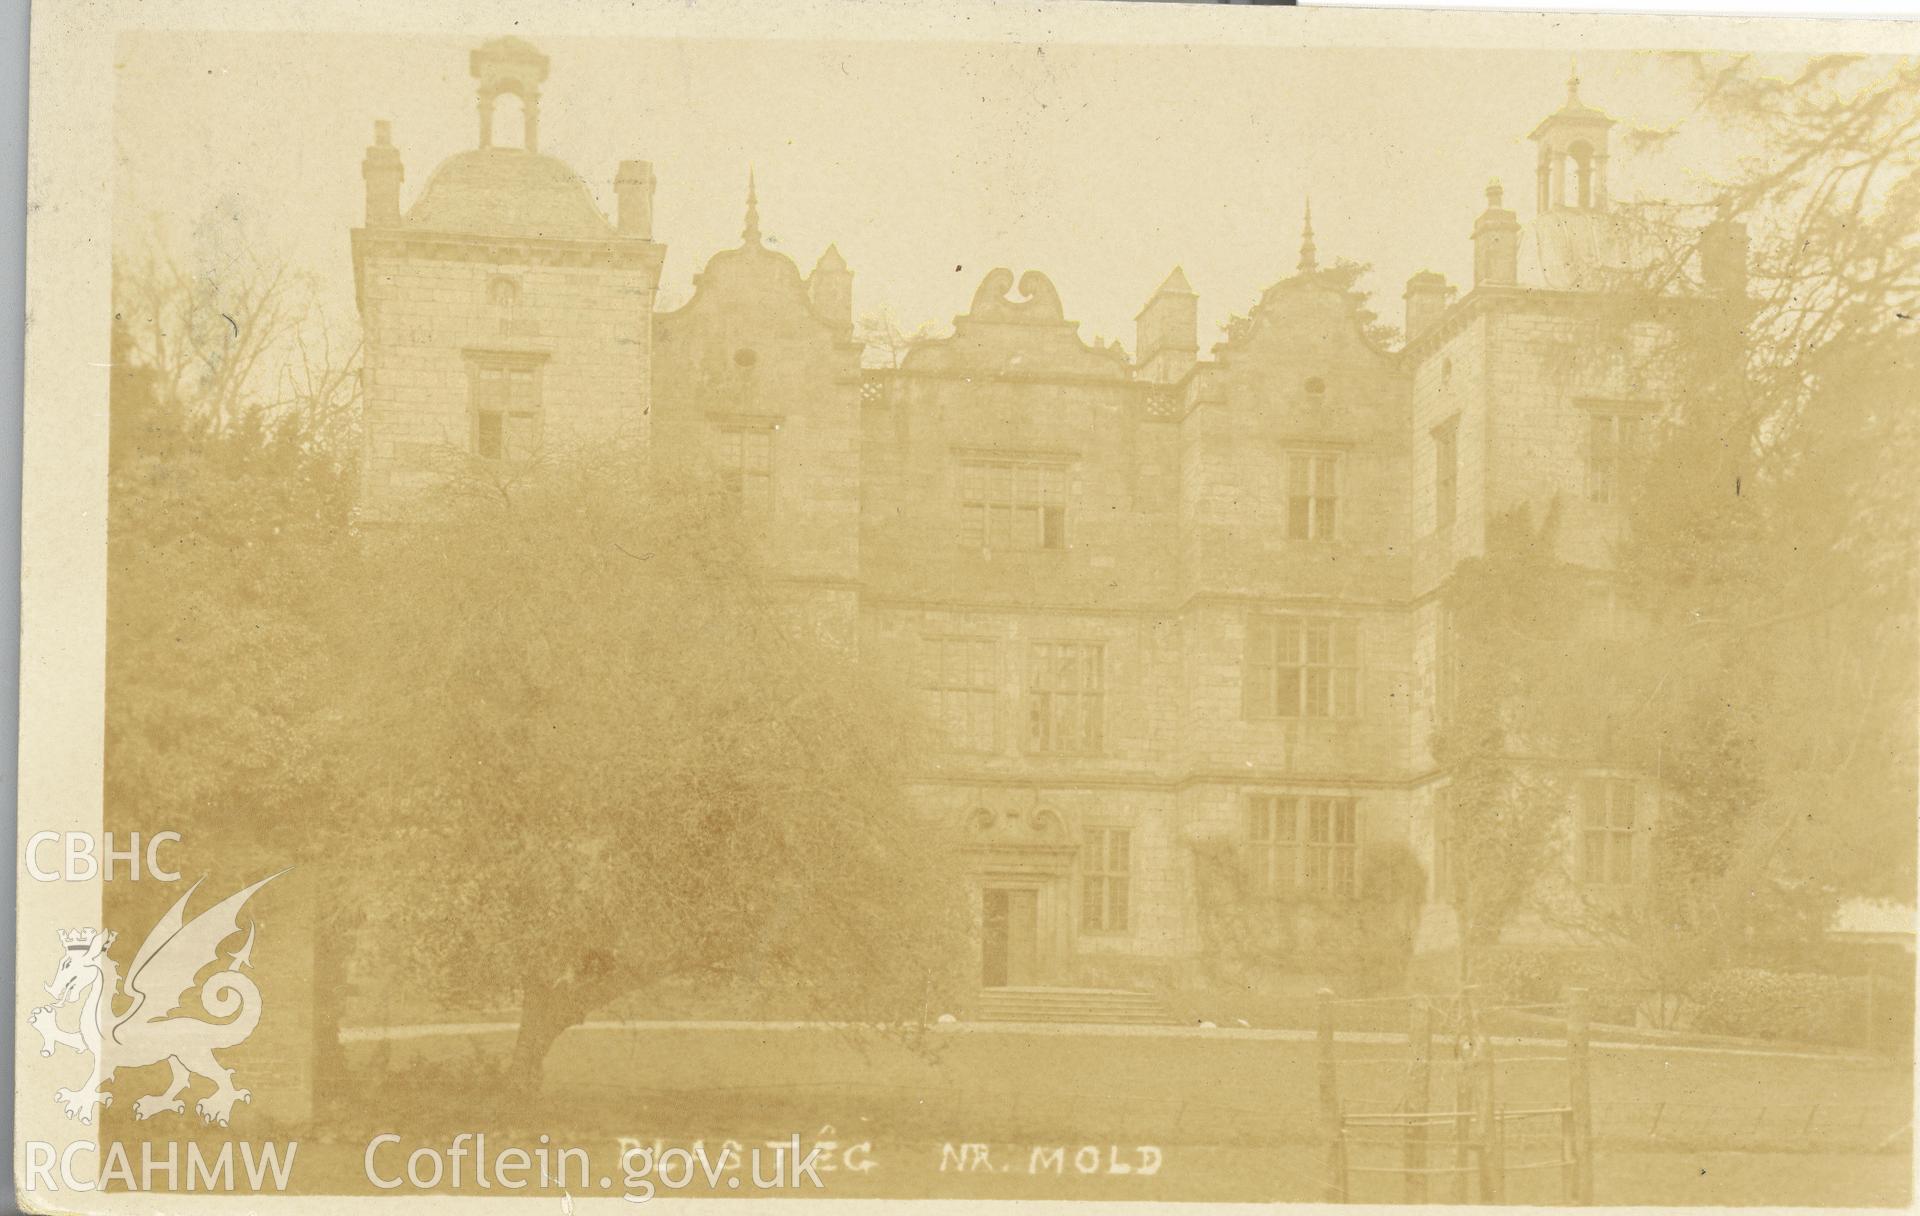 Digitised postcard image of Plas Teg mansion, Hope. Produced by Parks and Gardens Data Services, from an original item in the Peter Davis Collection at Parks and Gardens UK. We hold only web-resolution images of this collection, suitable for viewing on screen and for research purposes only. We do not hold the original images, or publication quality scans.